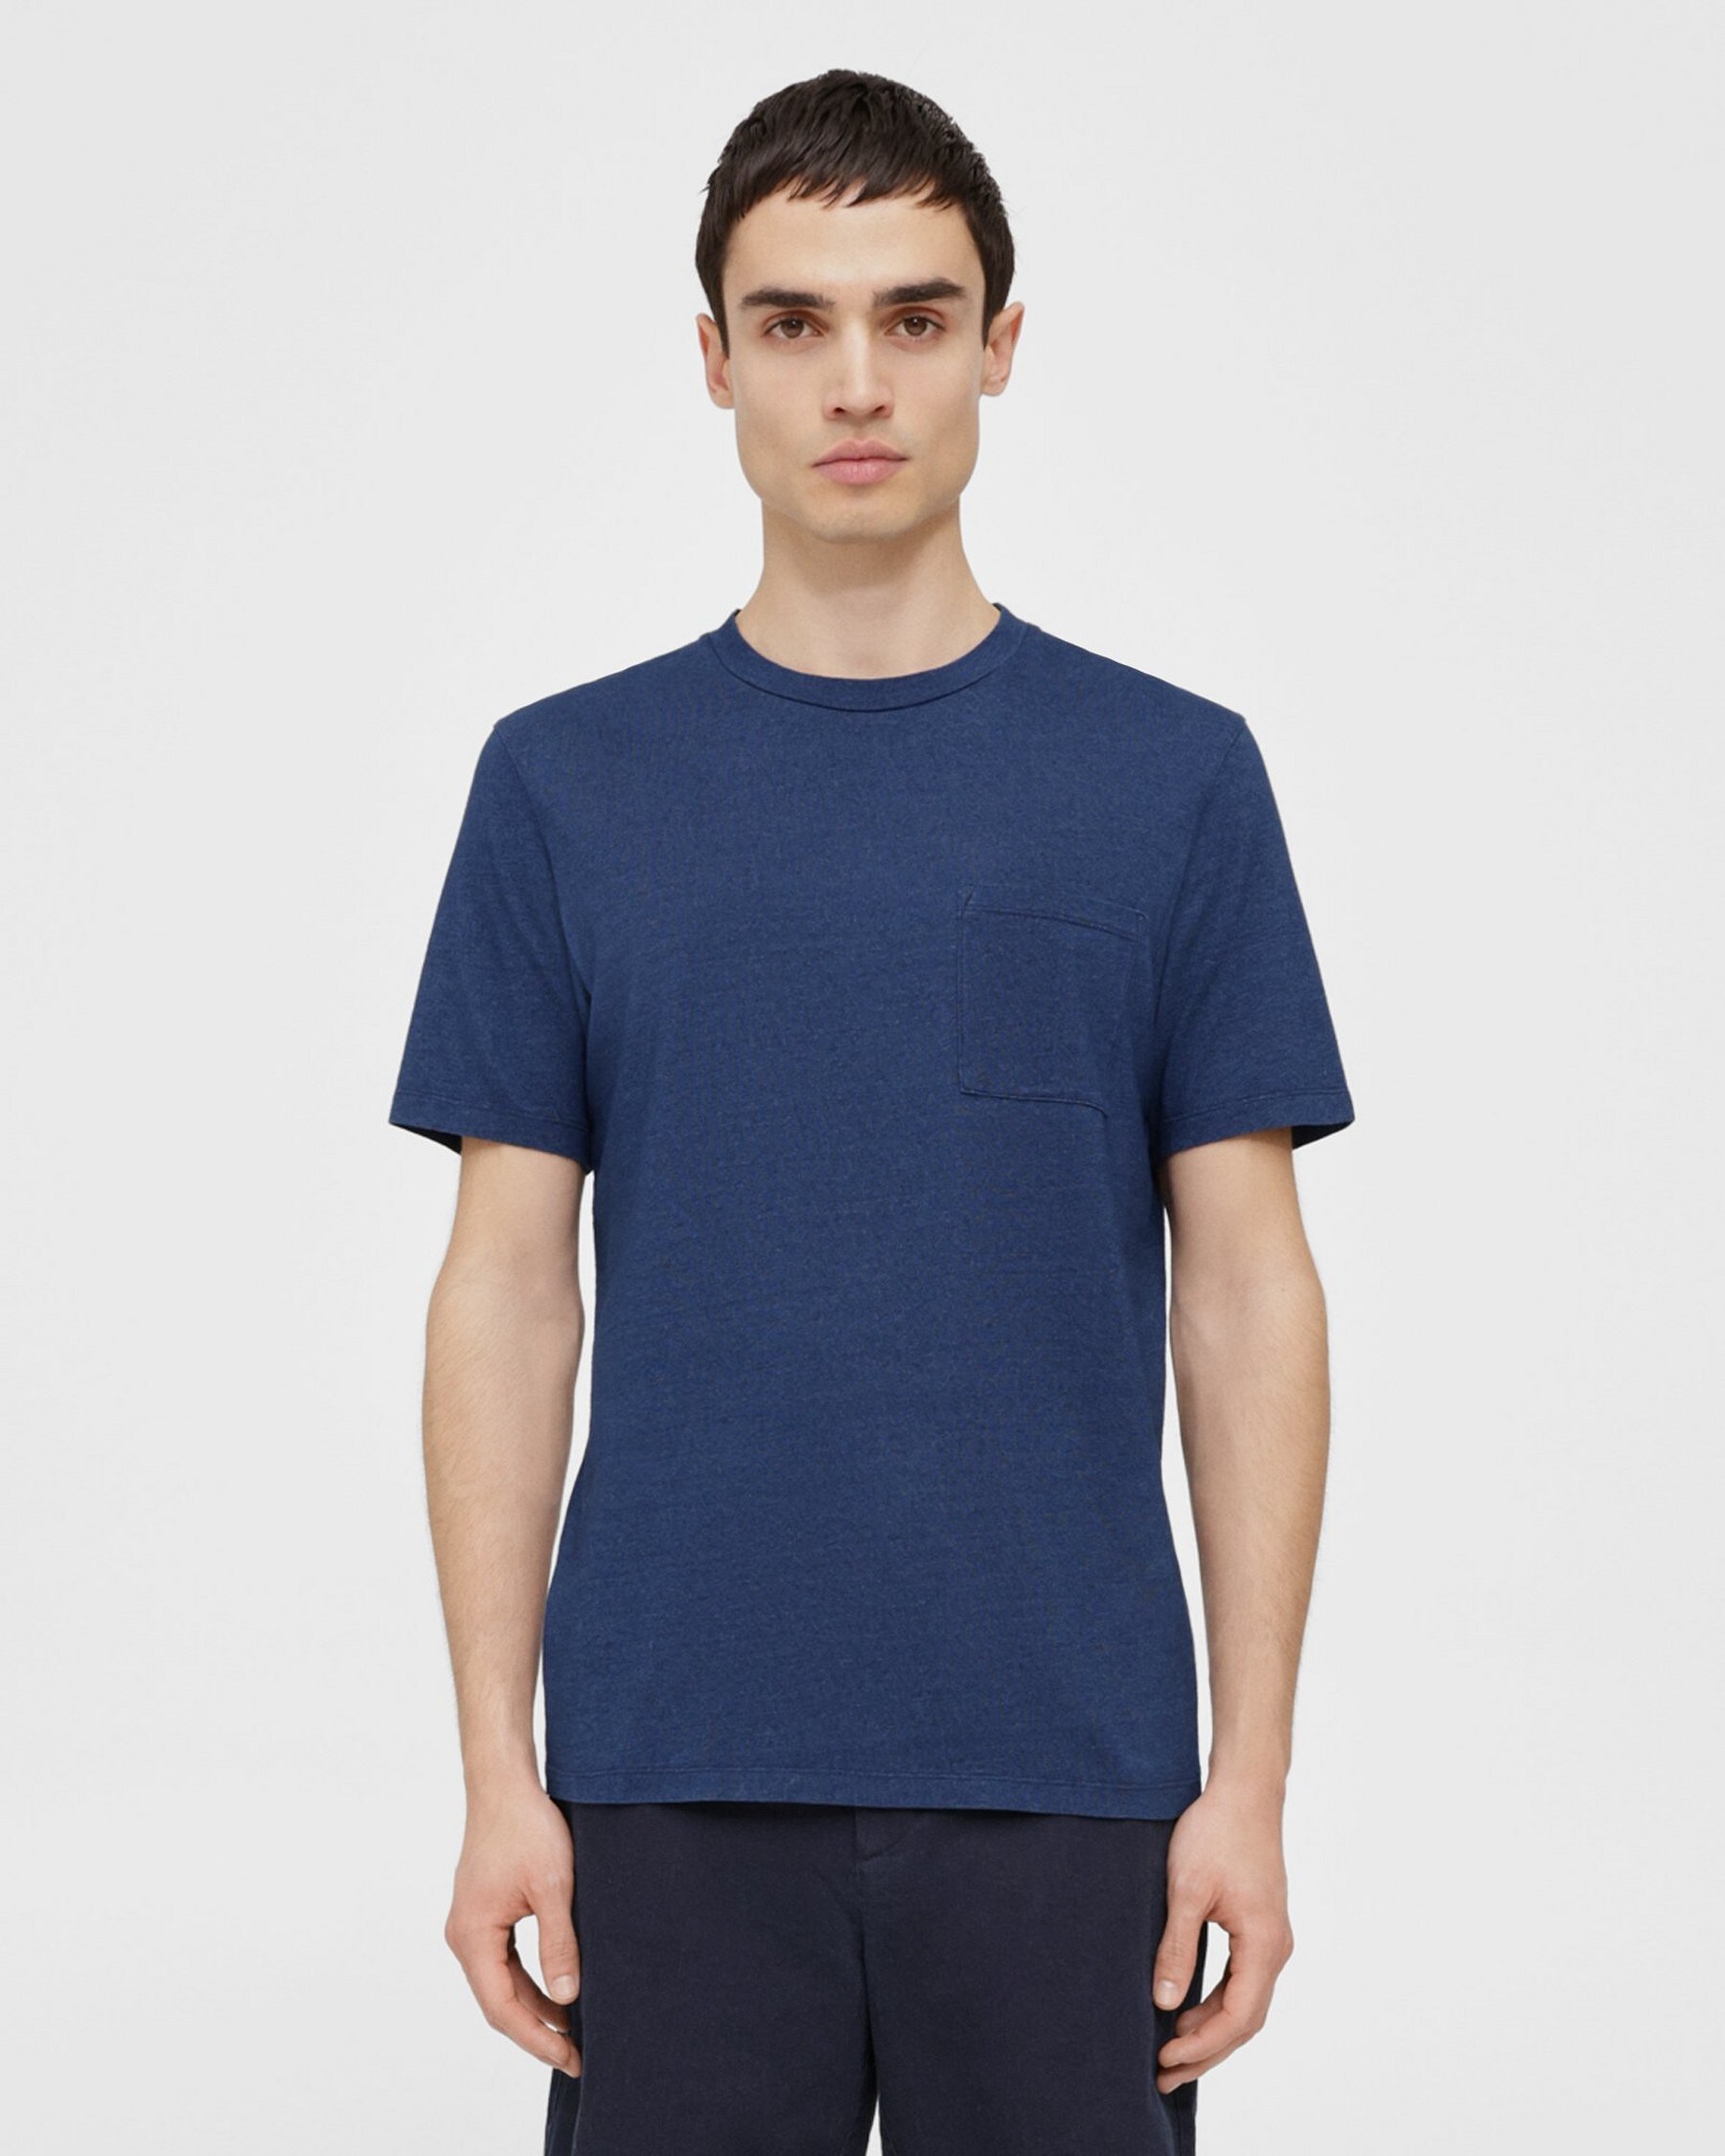 Essential Pocket Tee in Cotton-Modal